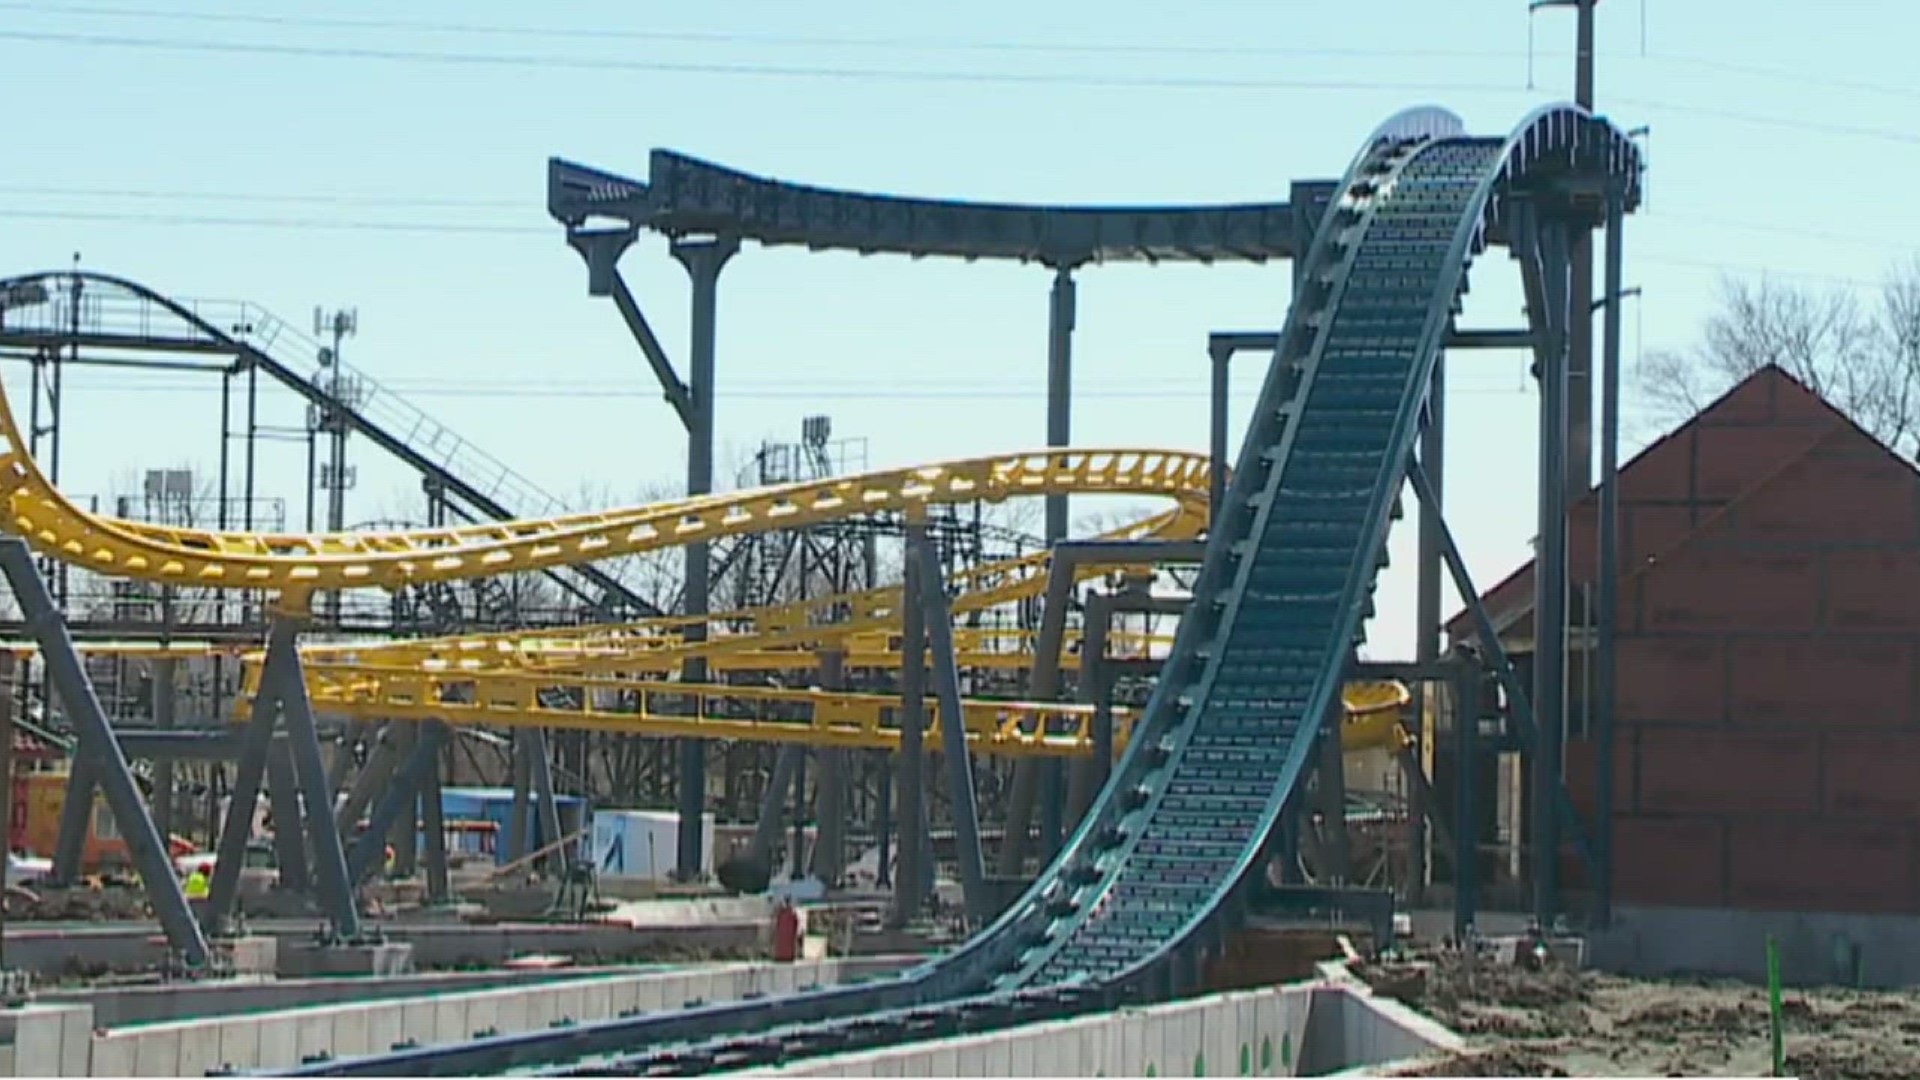 The "Super Flume" can sit six people instead of four.